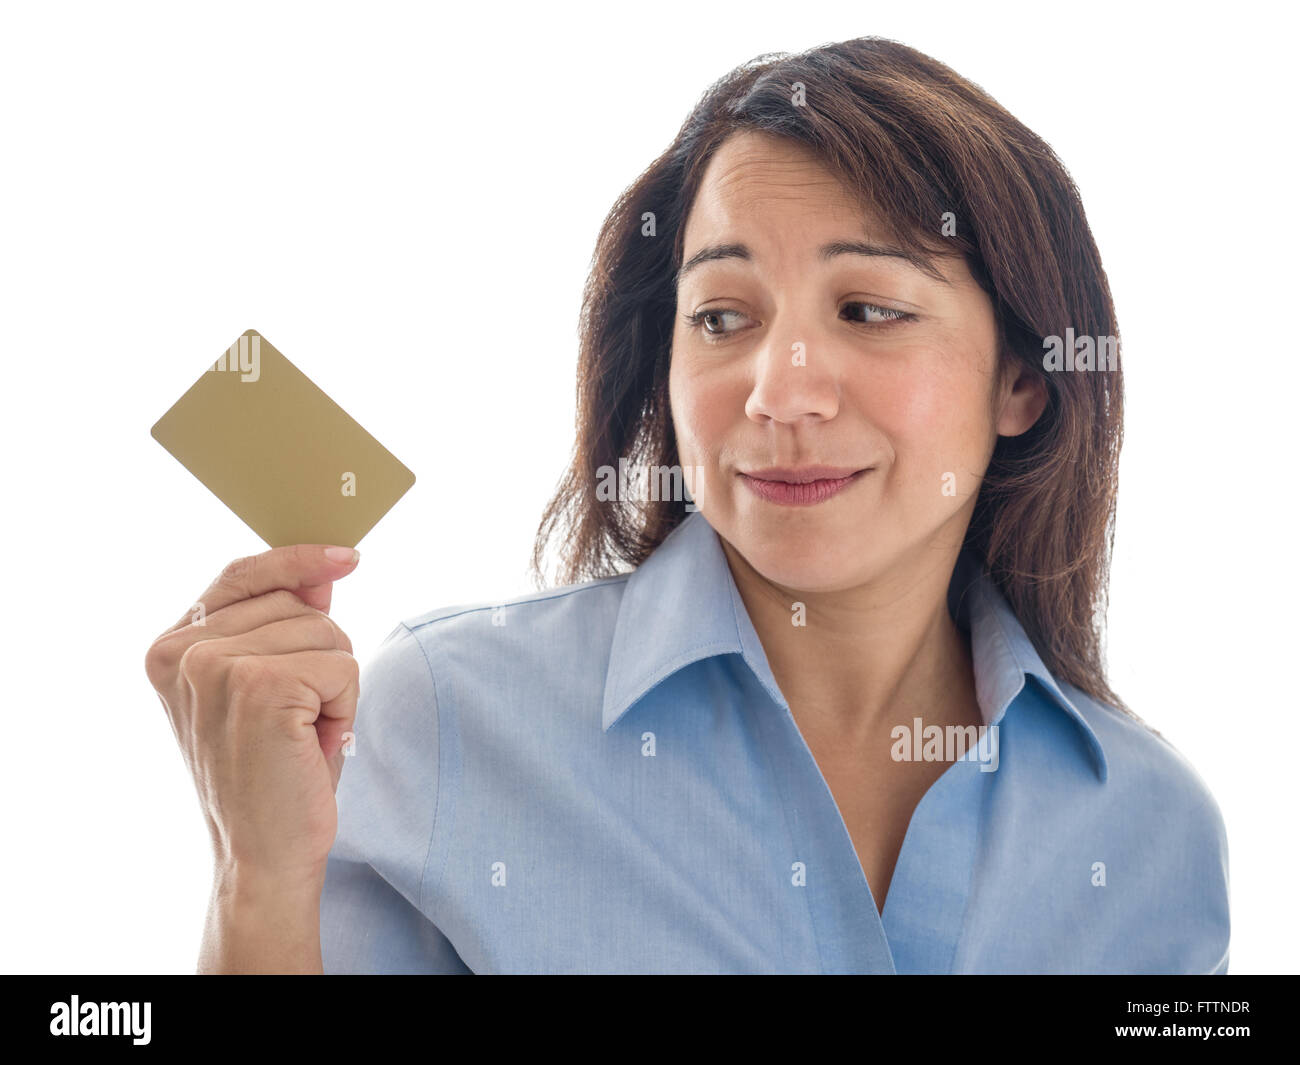 A young mixed race woman has second thoughts about a credit card or gift card. Stock Photo